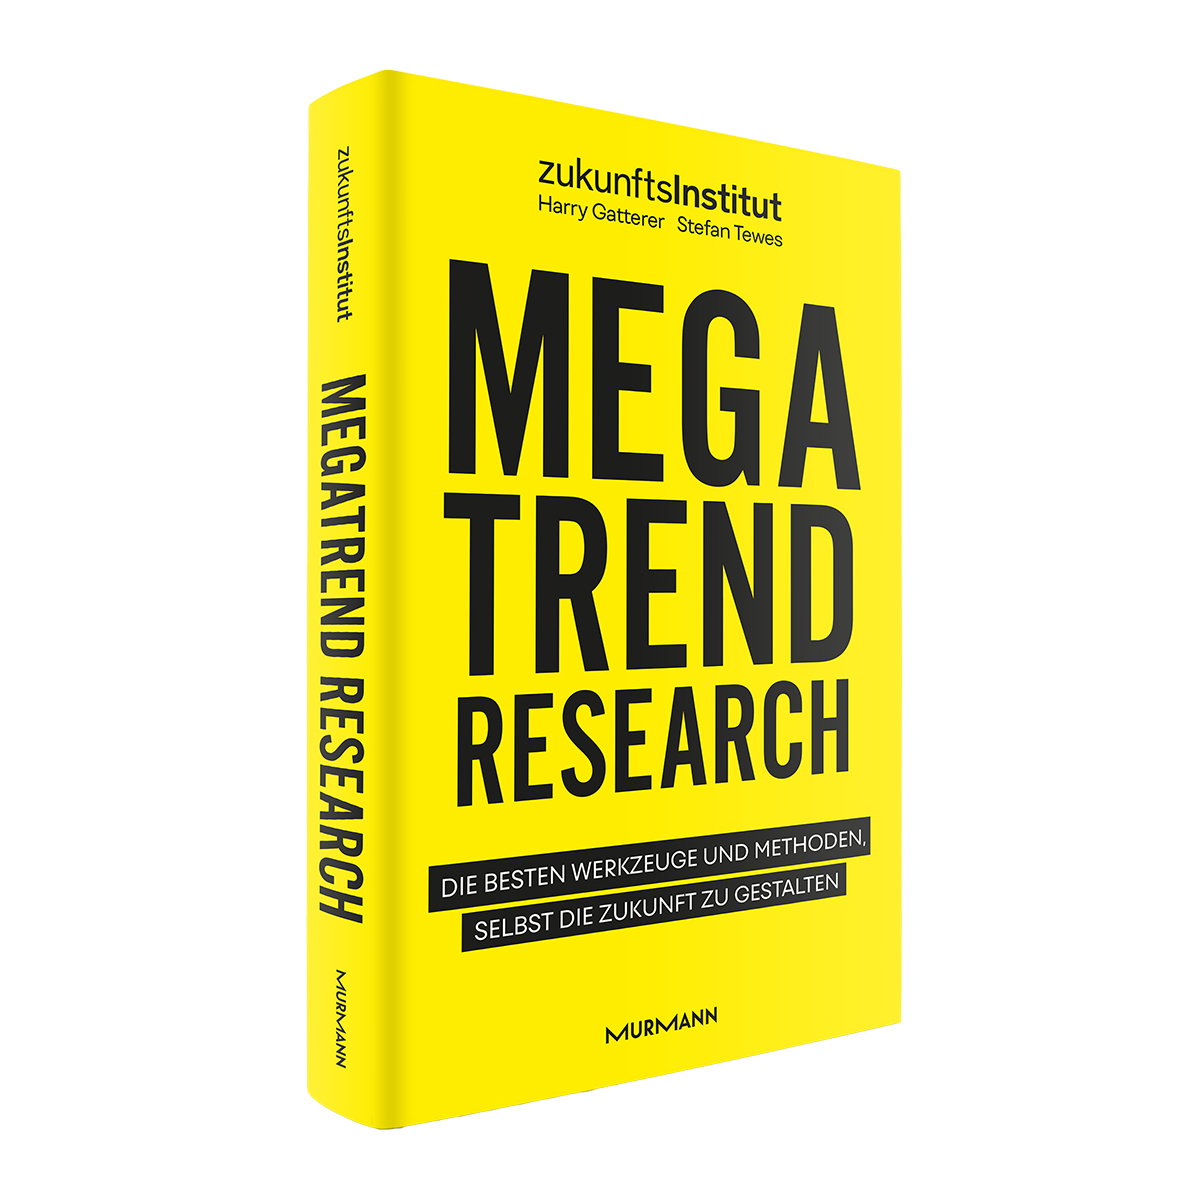 Megatrend Research